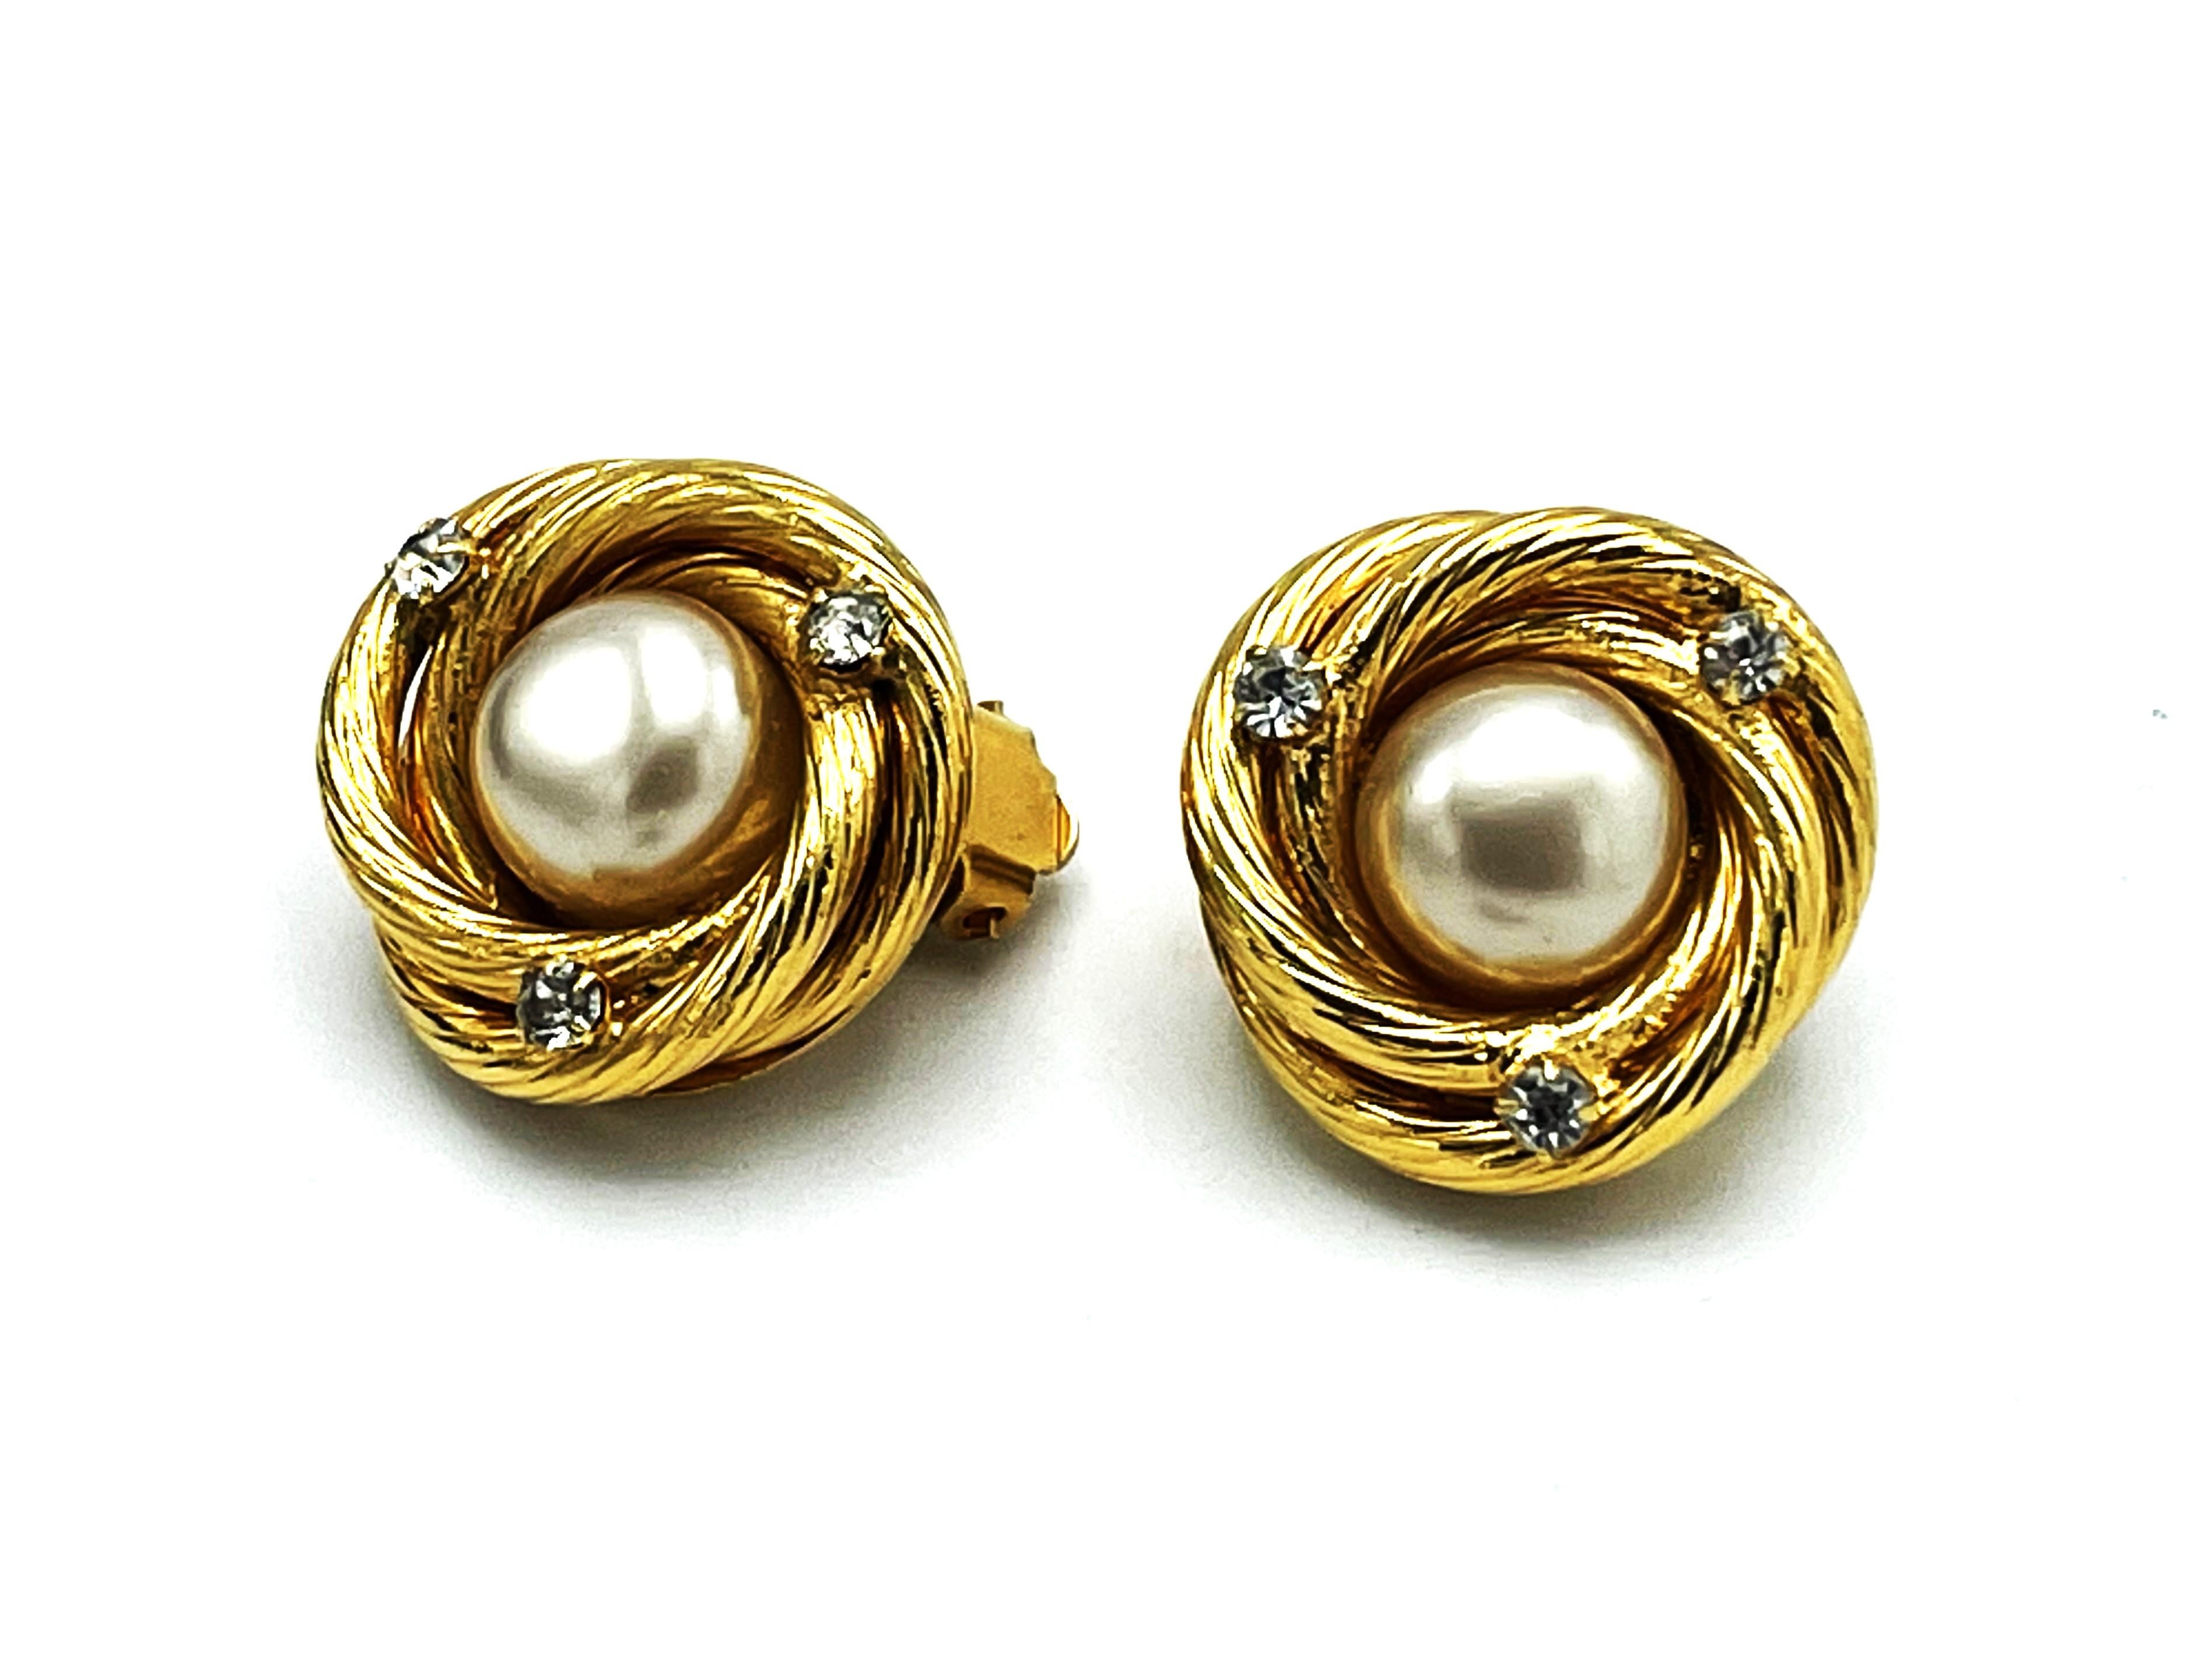 Modern ICONIC CHANEL Clip-on earring, larg pearl with classic gold cord signed, 1995 P For Sale